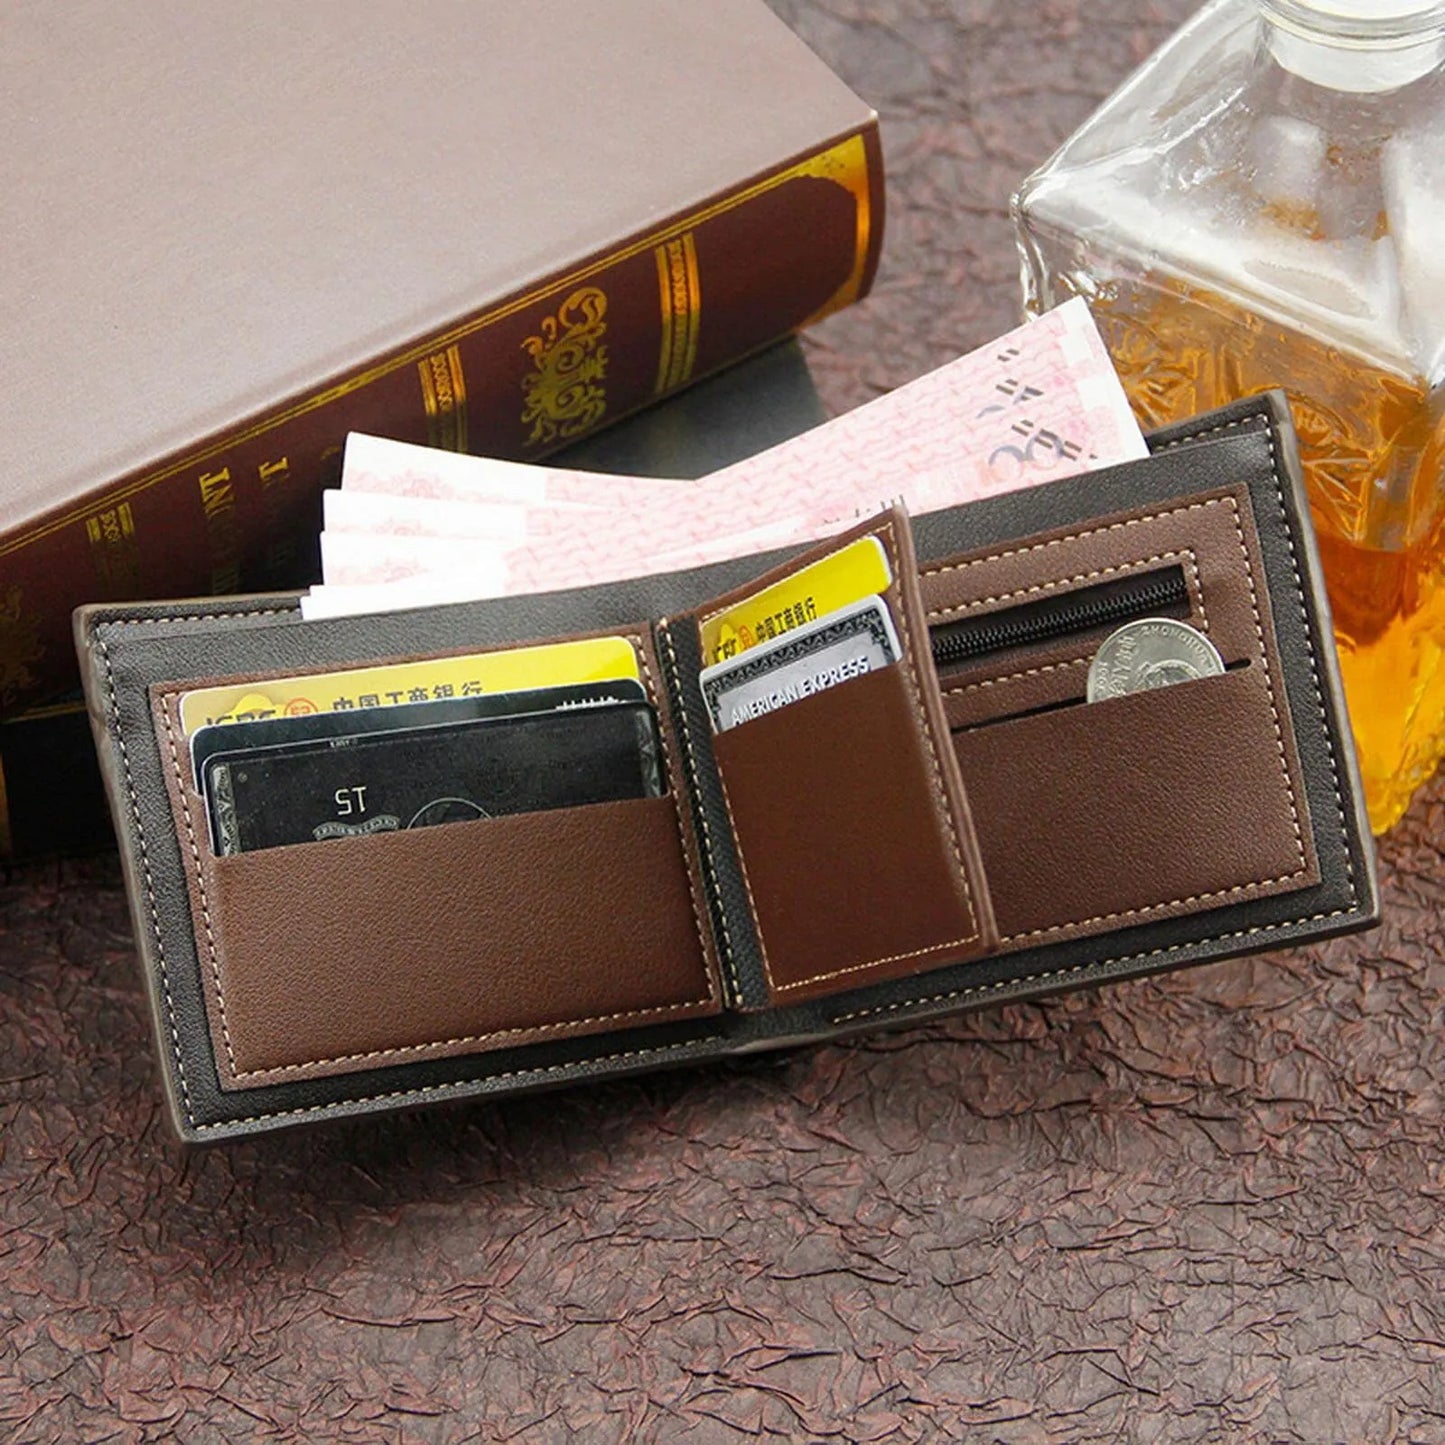 Men's Short Frosted Large Capacity Leather Wallet,Multi-Slot Coin Pocket Photo Holder Small Men's Wallet,Vintage Wallet for Male